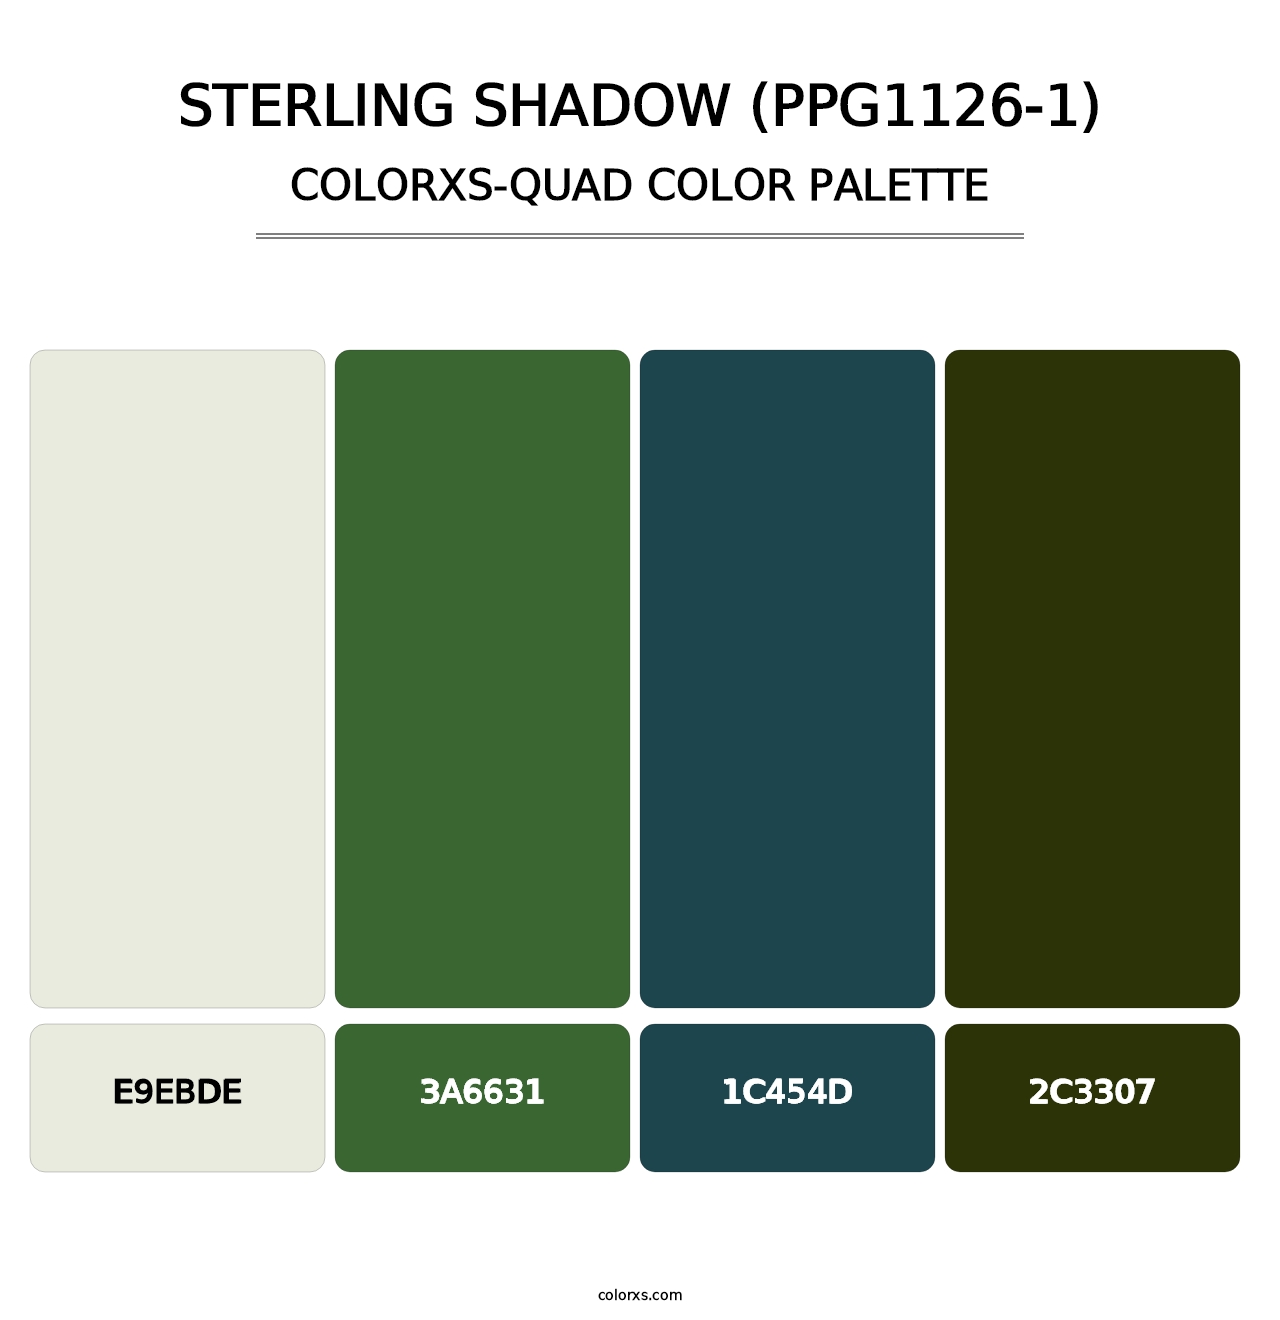 Sterling Shadow (PPG1126-1) - Colorxs Quad Palette